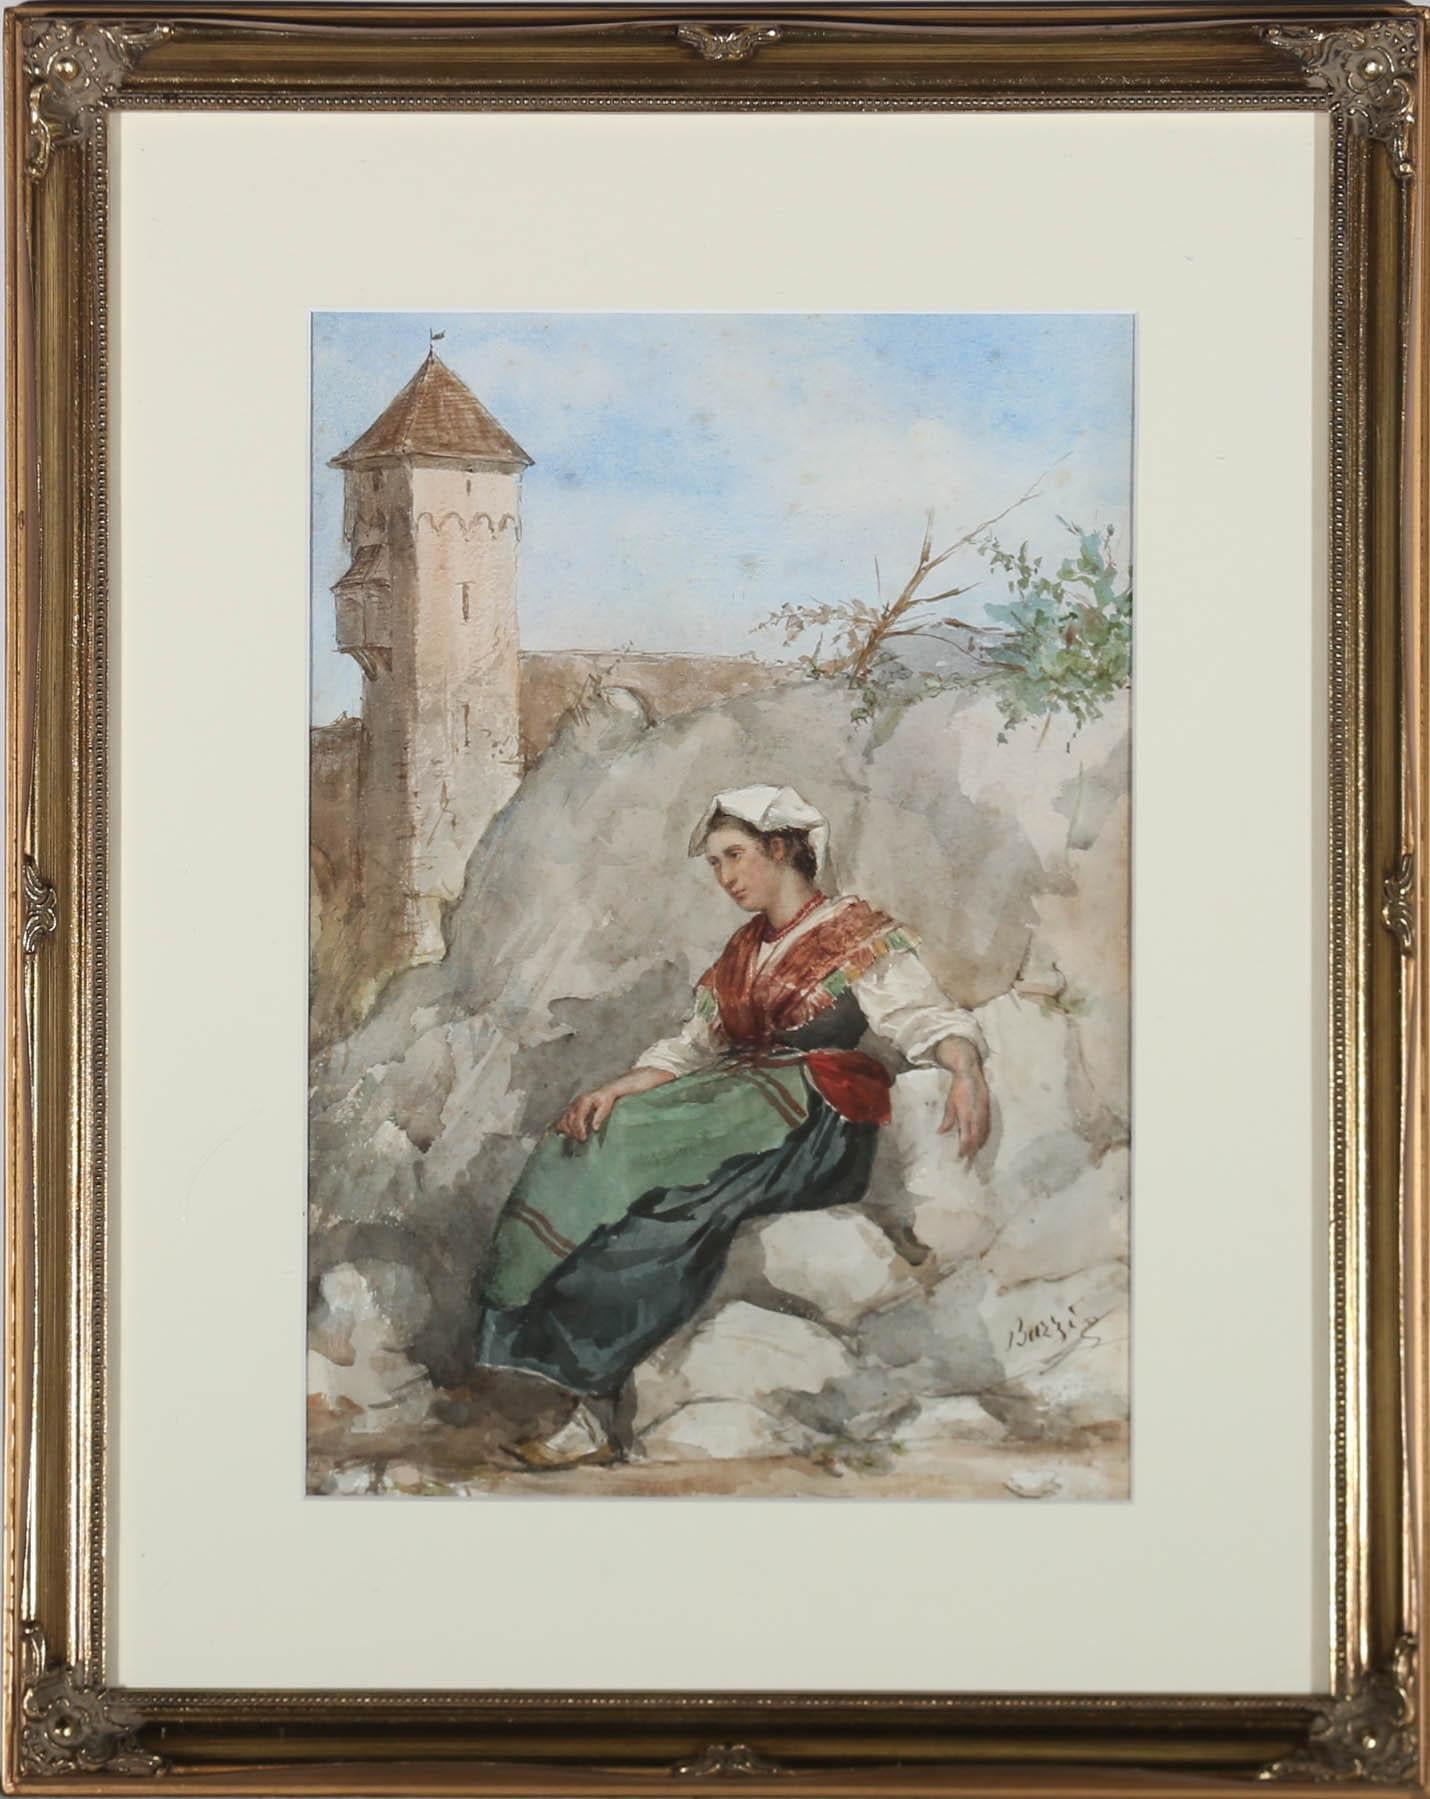 A wonderful 19th century watercolour by Italian artist Achille Buzzi, depicting a woman resting on a rocky wall. The woman has been captured in delicate detail, staring into the distance beyond. Signed to the lower right. The elegant painting has